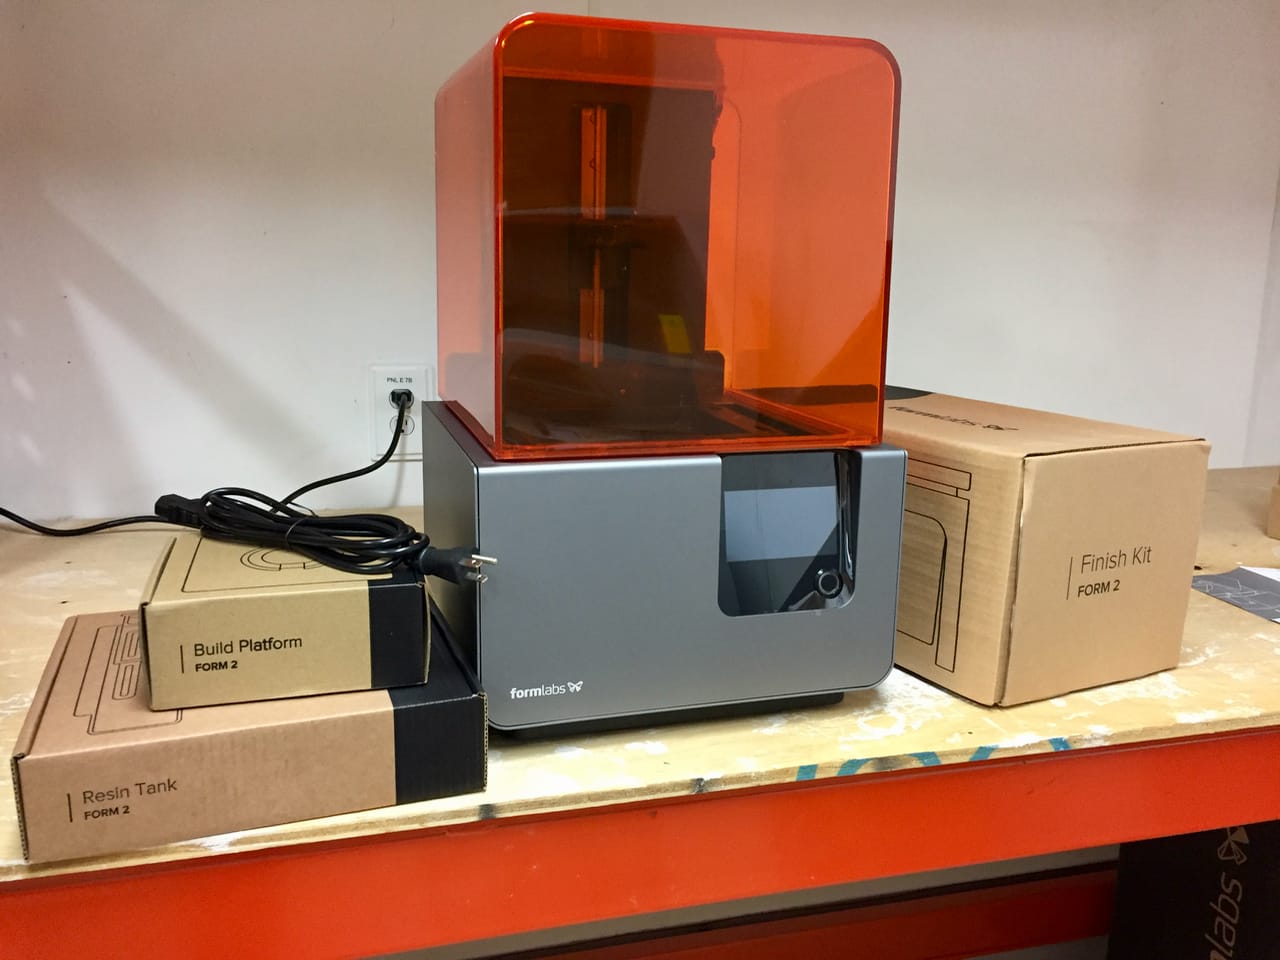  Getting ready to put together a Formlabs Form 2 desktop 3D printer 